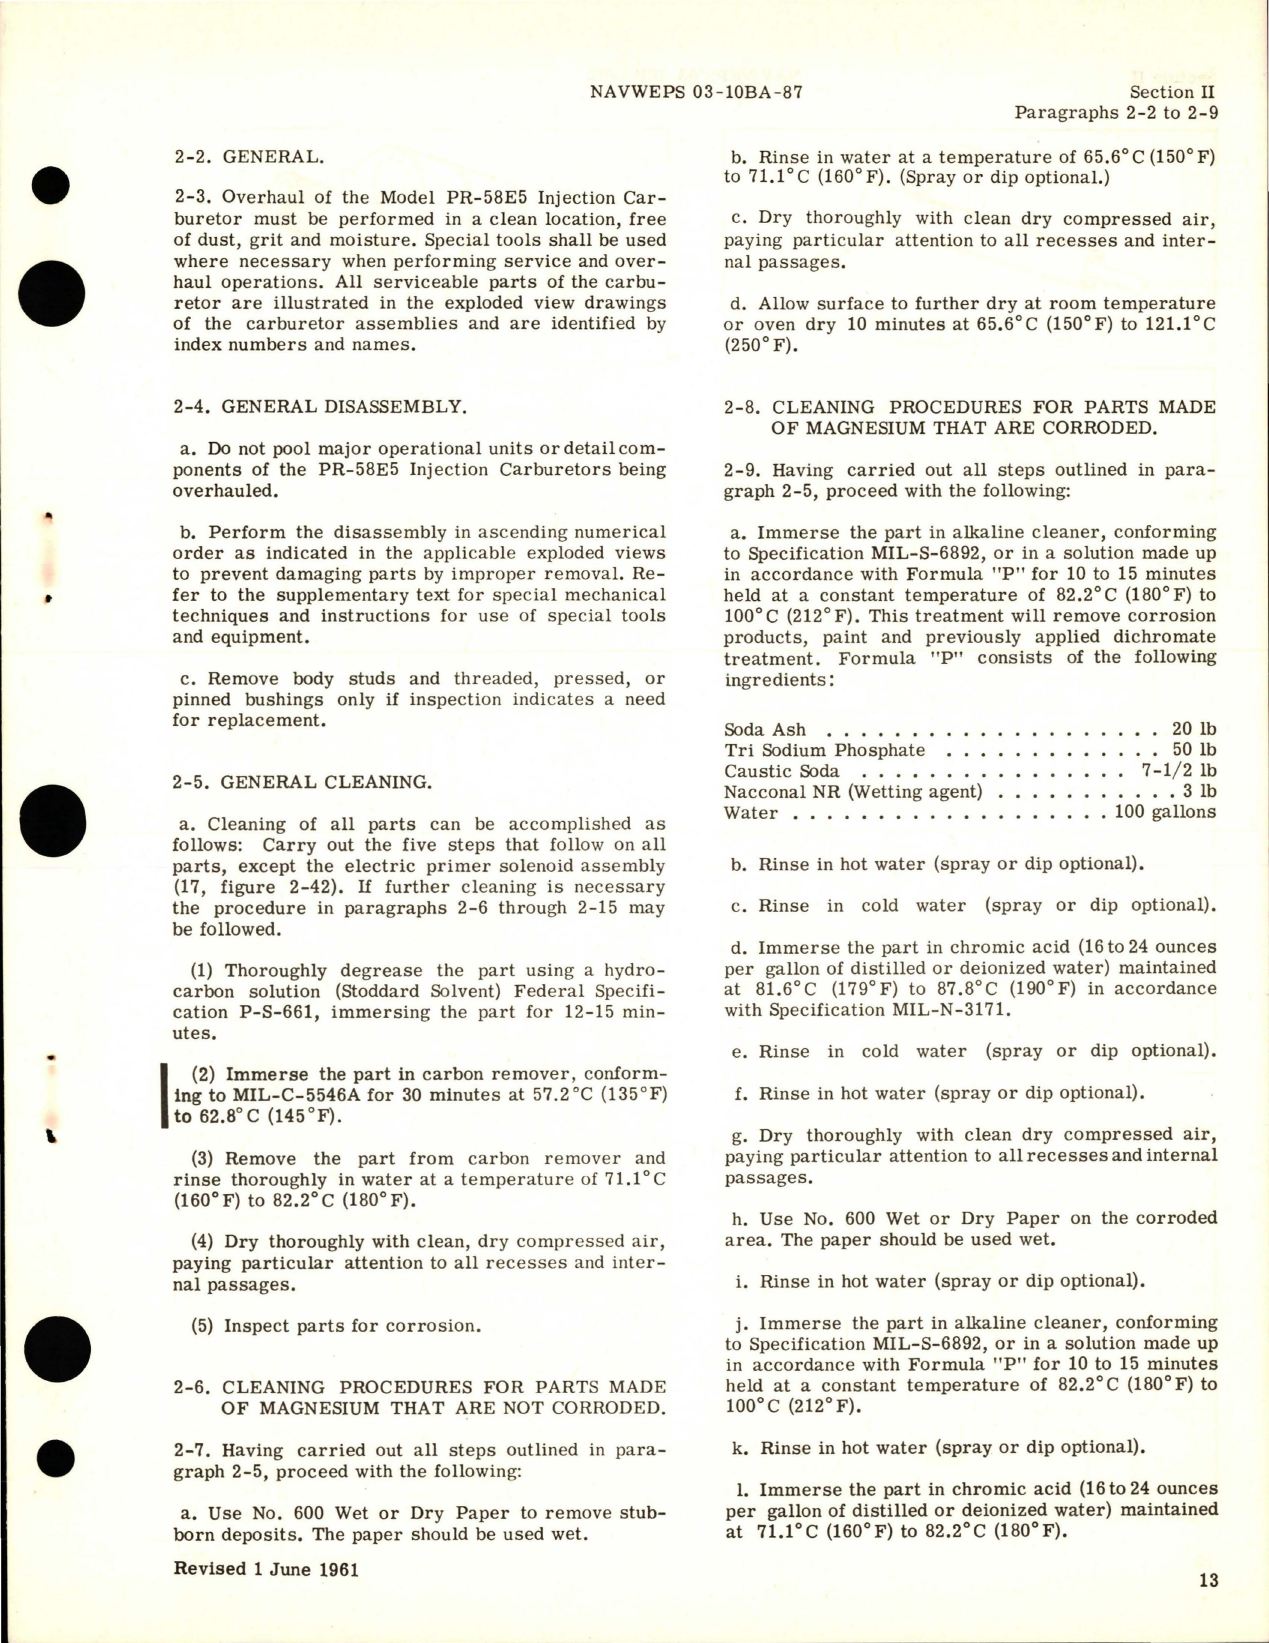 Sample page 9 from AirCorps Library document: Overhaul Instructions for Injection Carburetor - Model PR-58E5